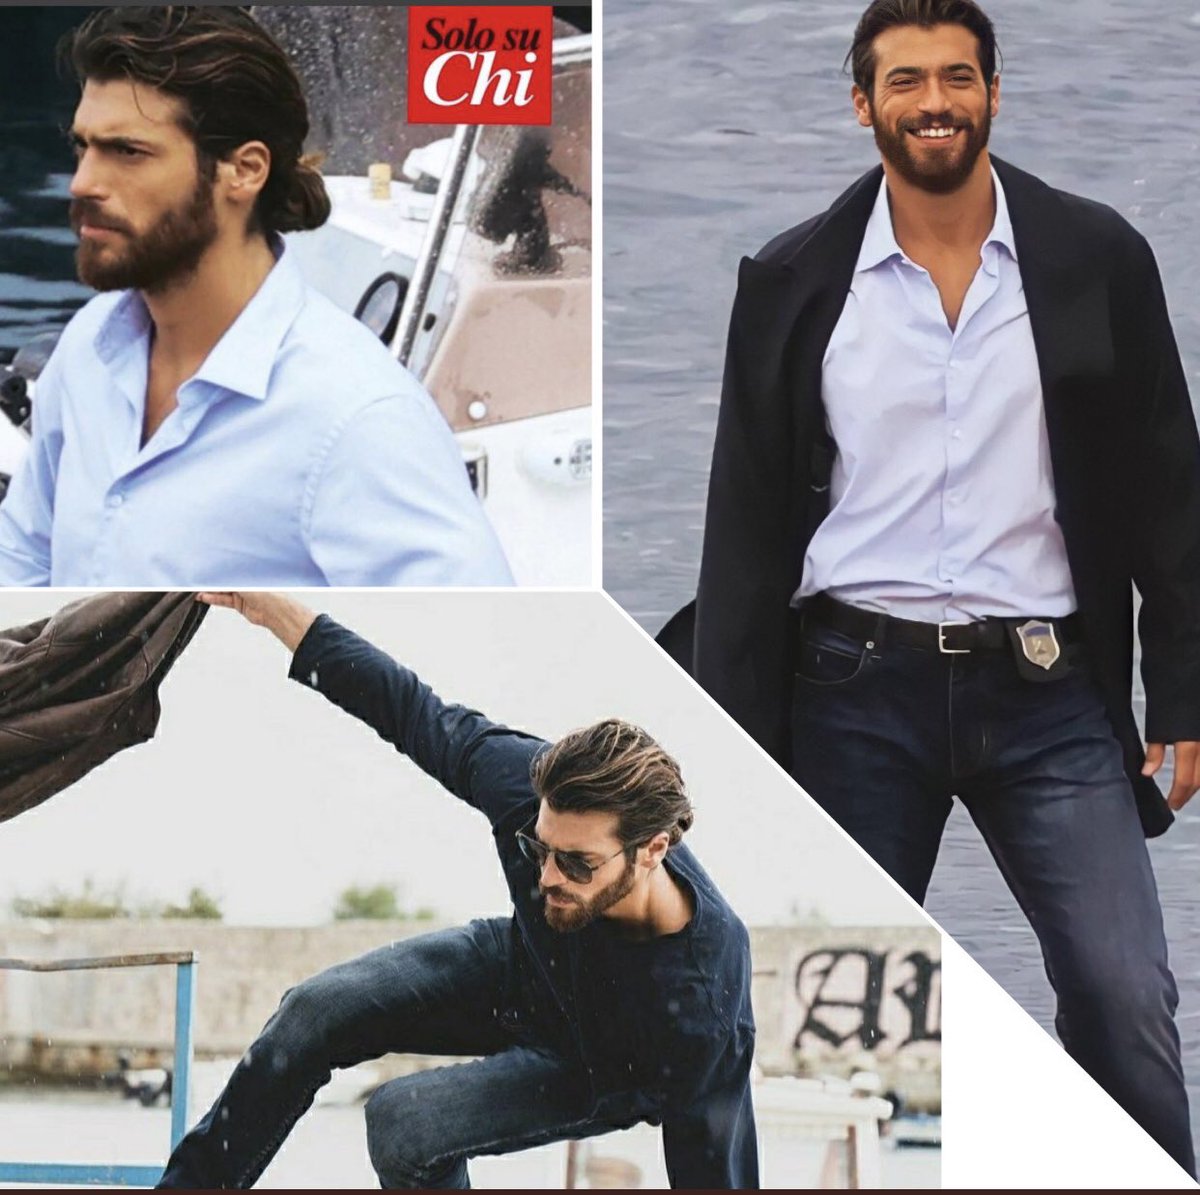 Our Cop will be with special taste🔥👮‍♀️ ❤️ #CanYaman #ViolaComeIlMare #FrancescoDemir #LuxVide #sandokan #CanYamanMania